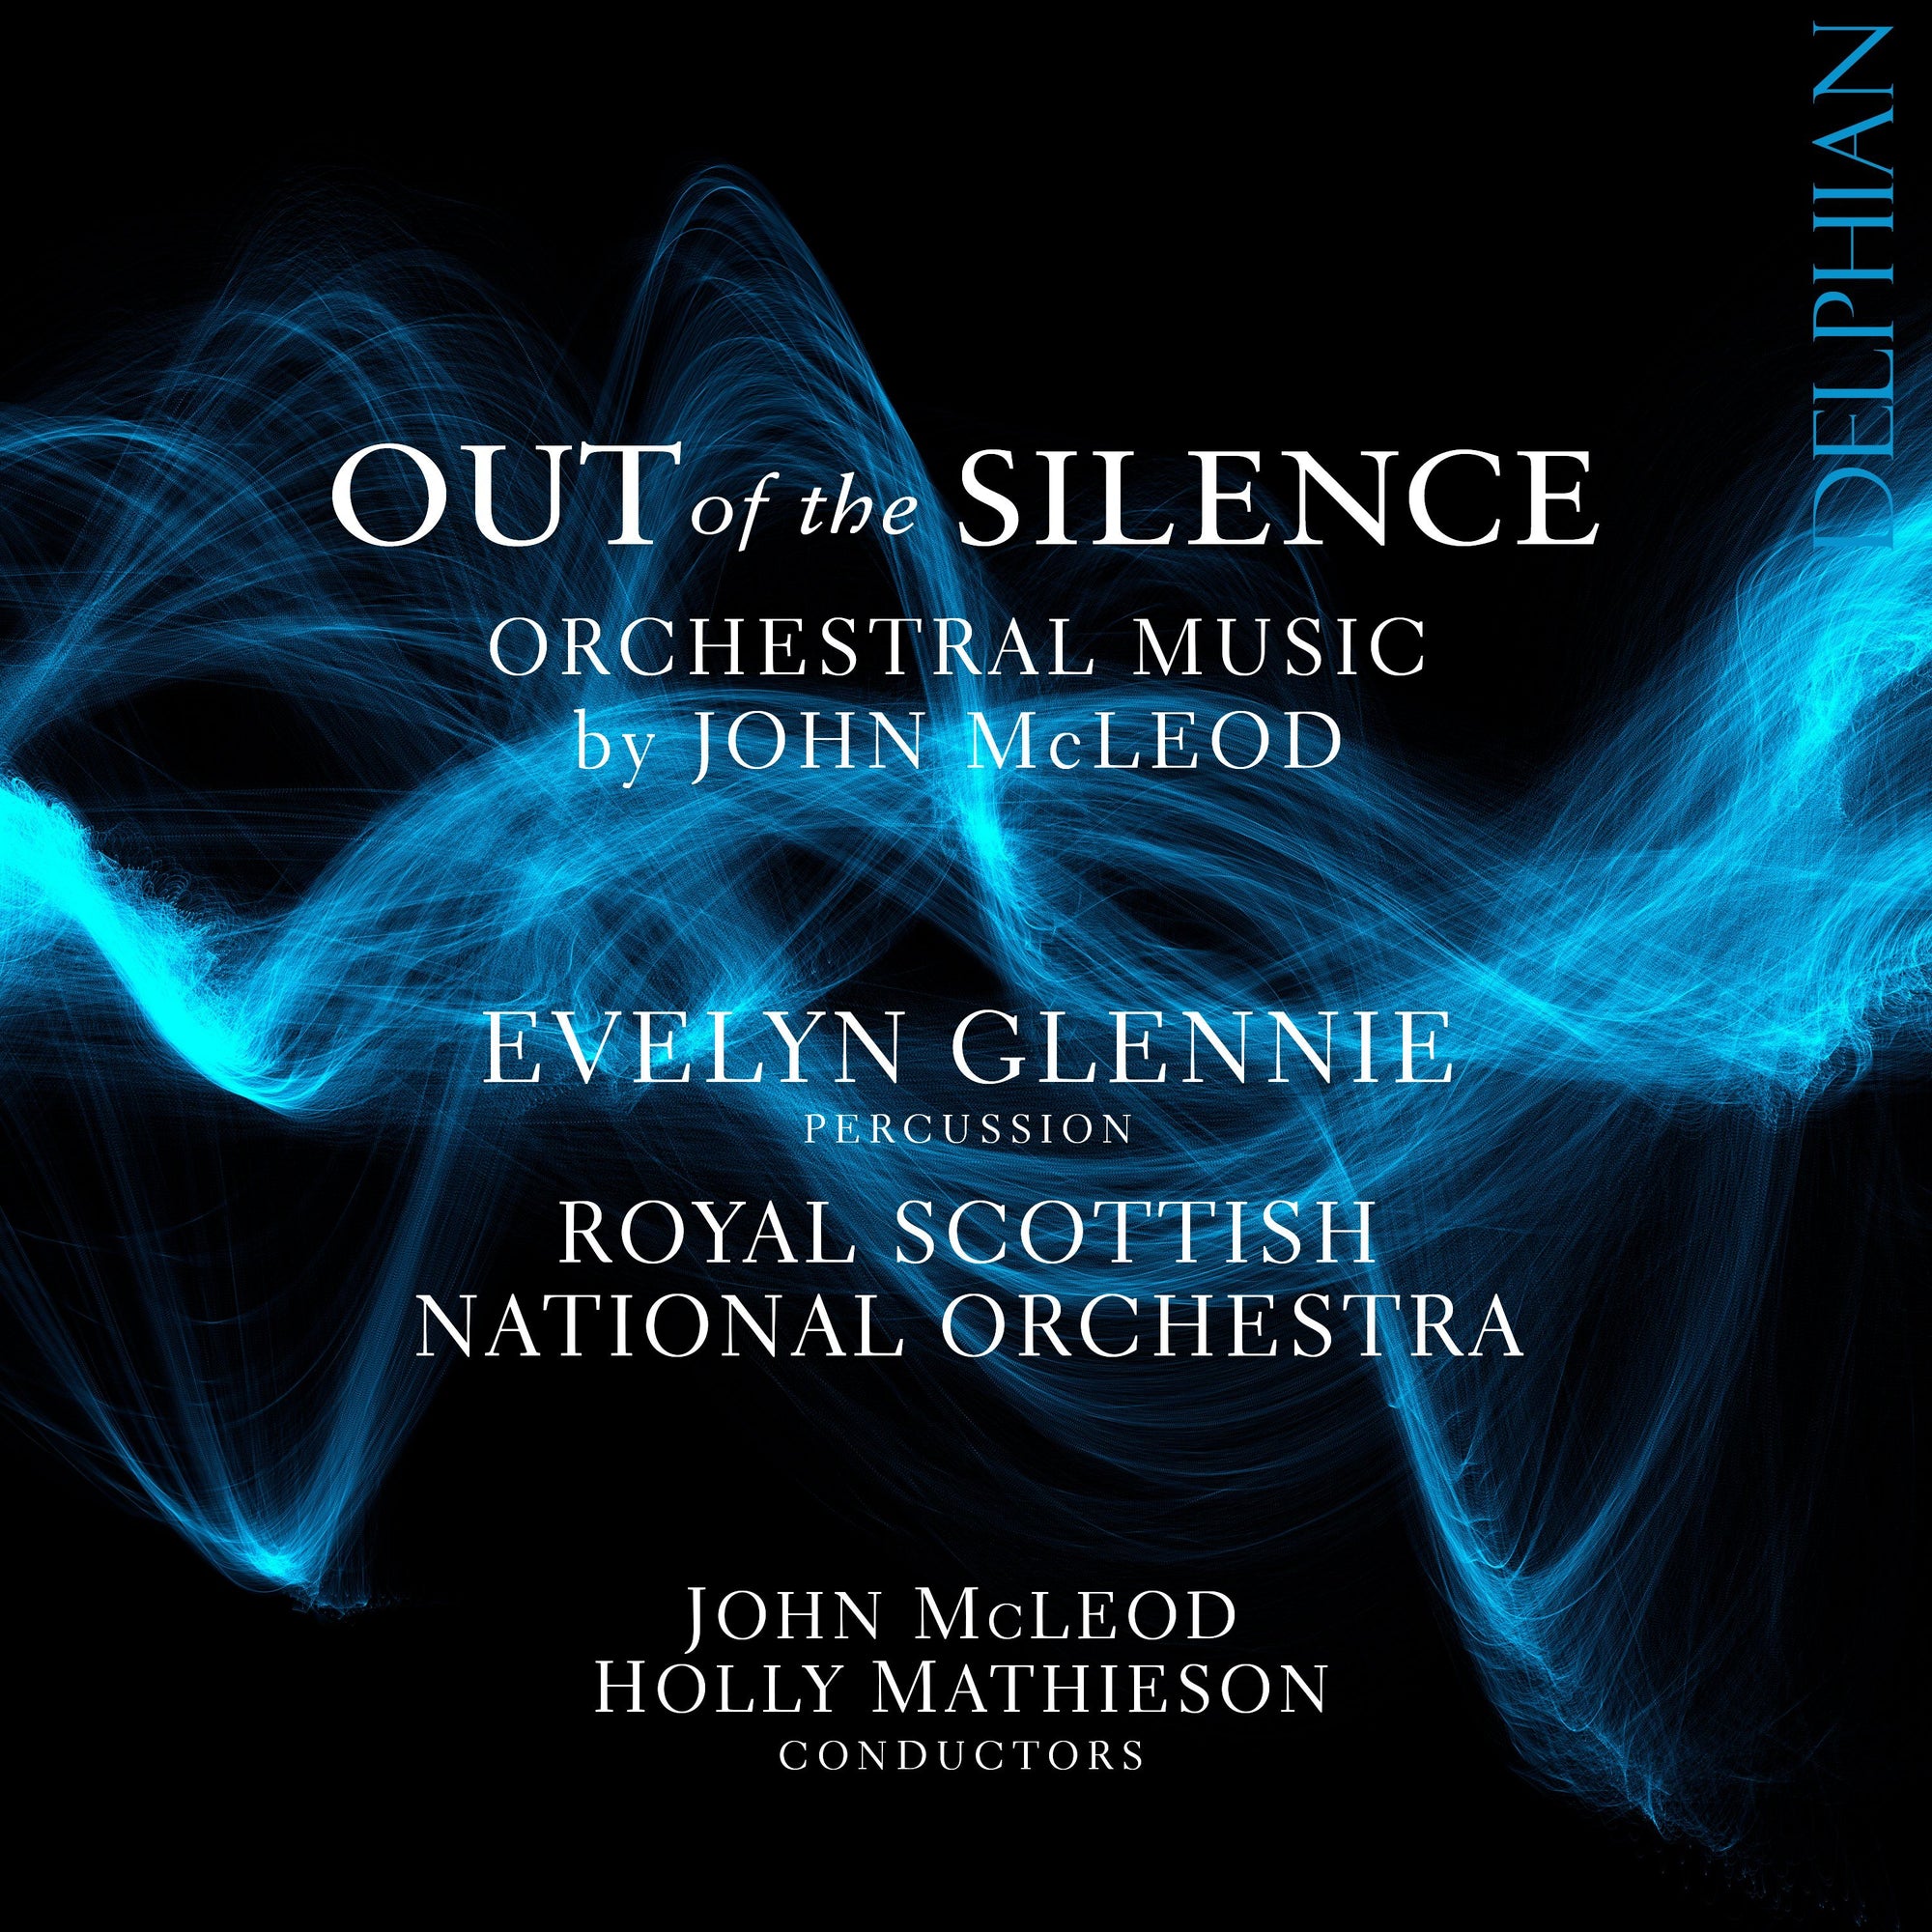 Out of the Silence: Orchestral Music by John McLeod CD Delphian Records